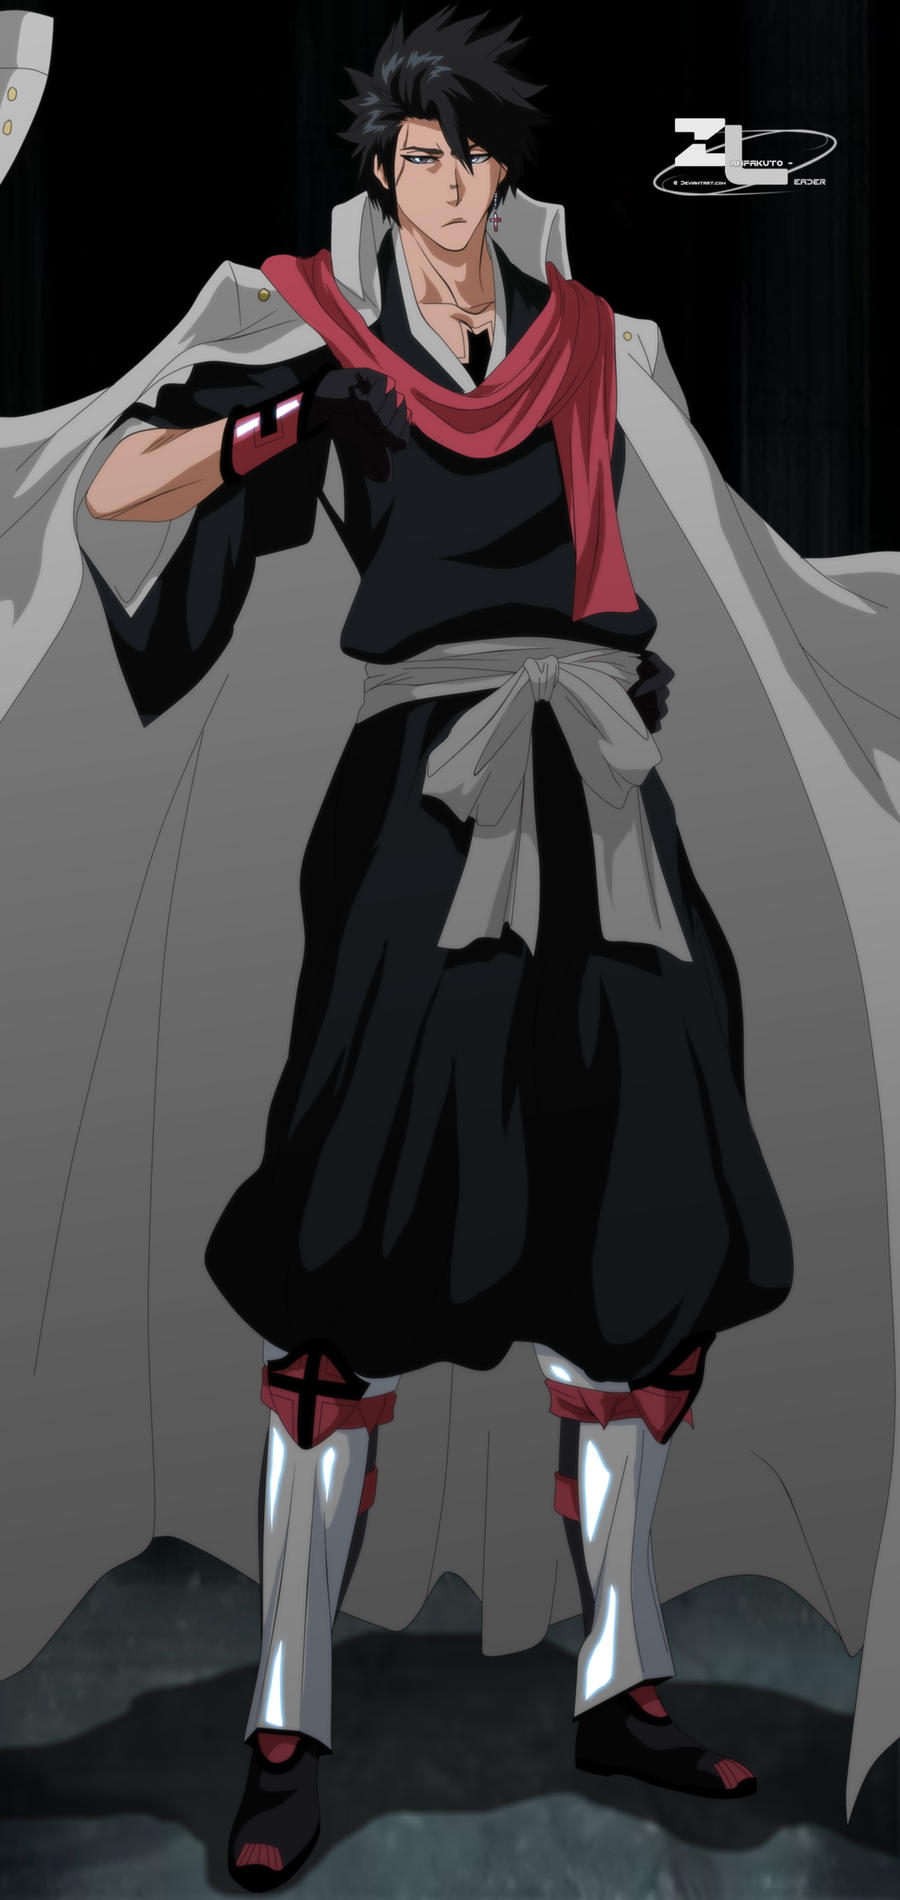 Bleach Animated World - The heavens resound with deceit. The